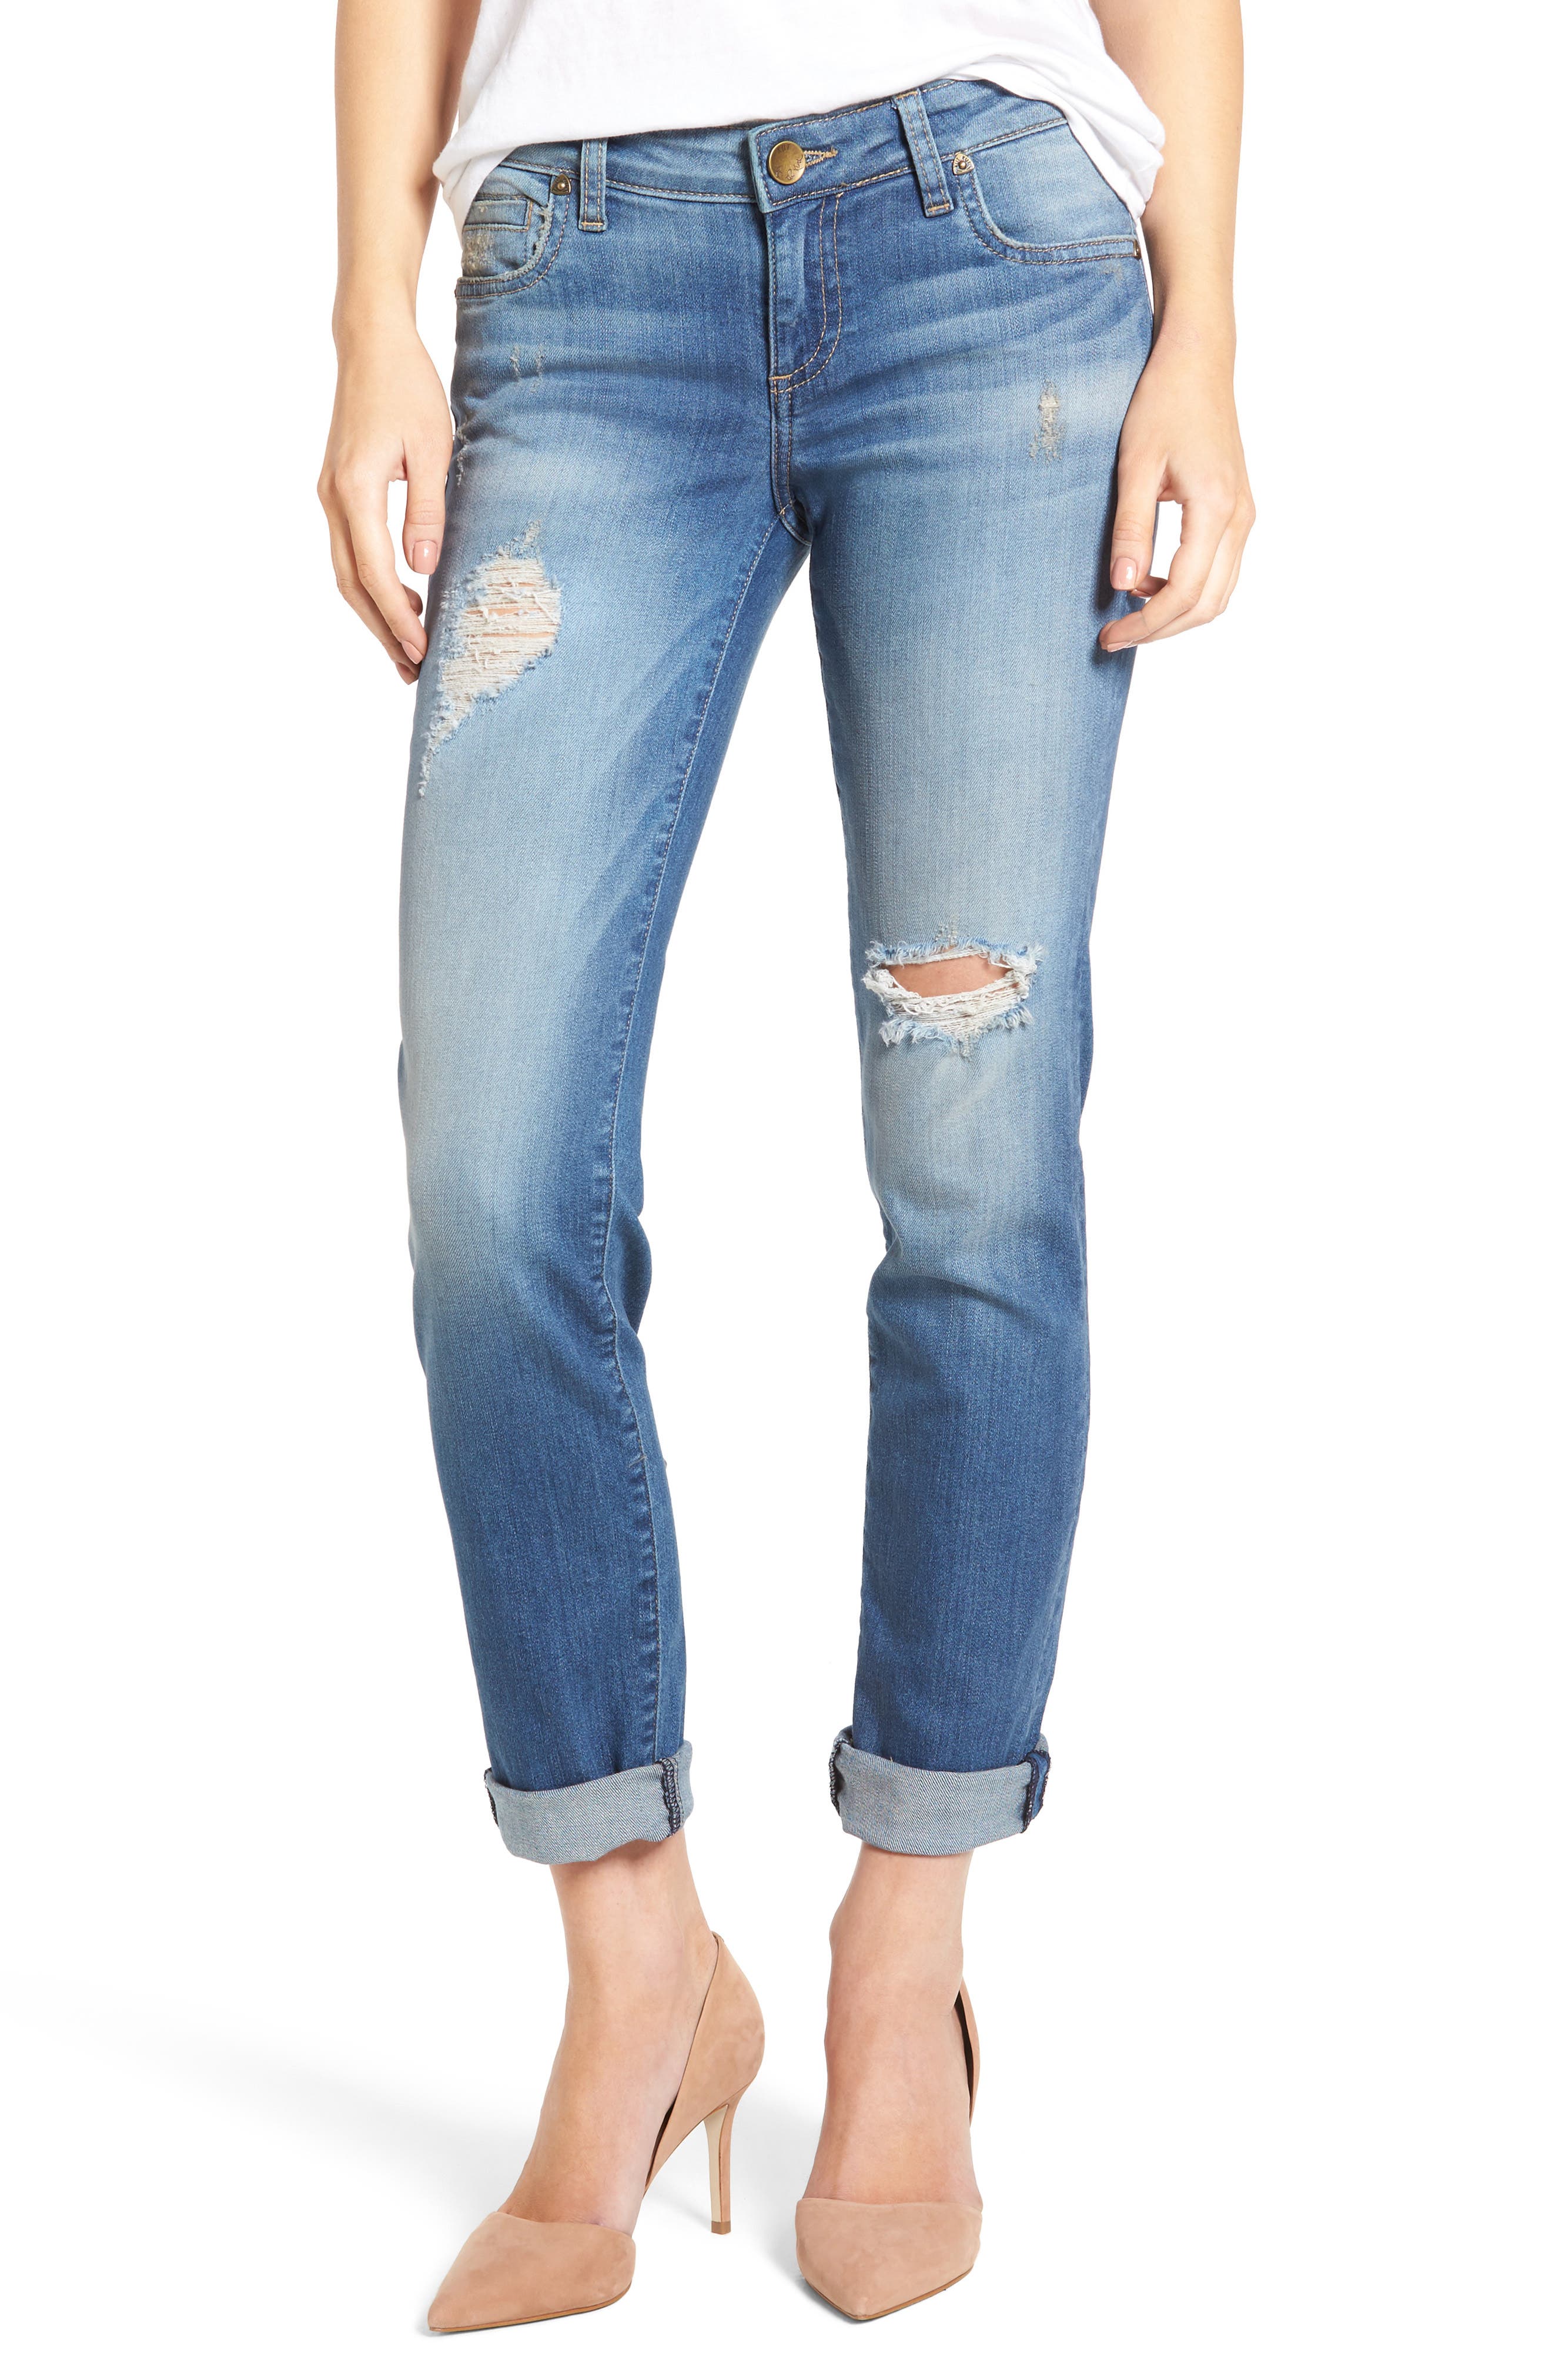 kut from the kloth distressed jeans